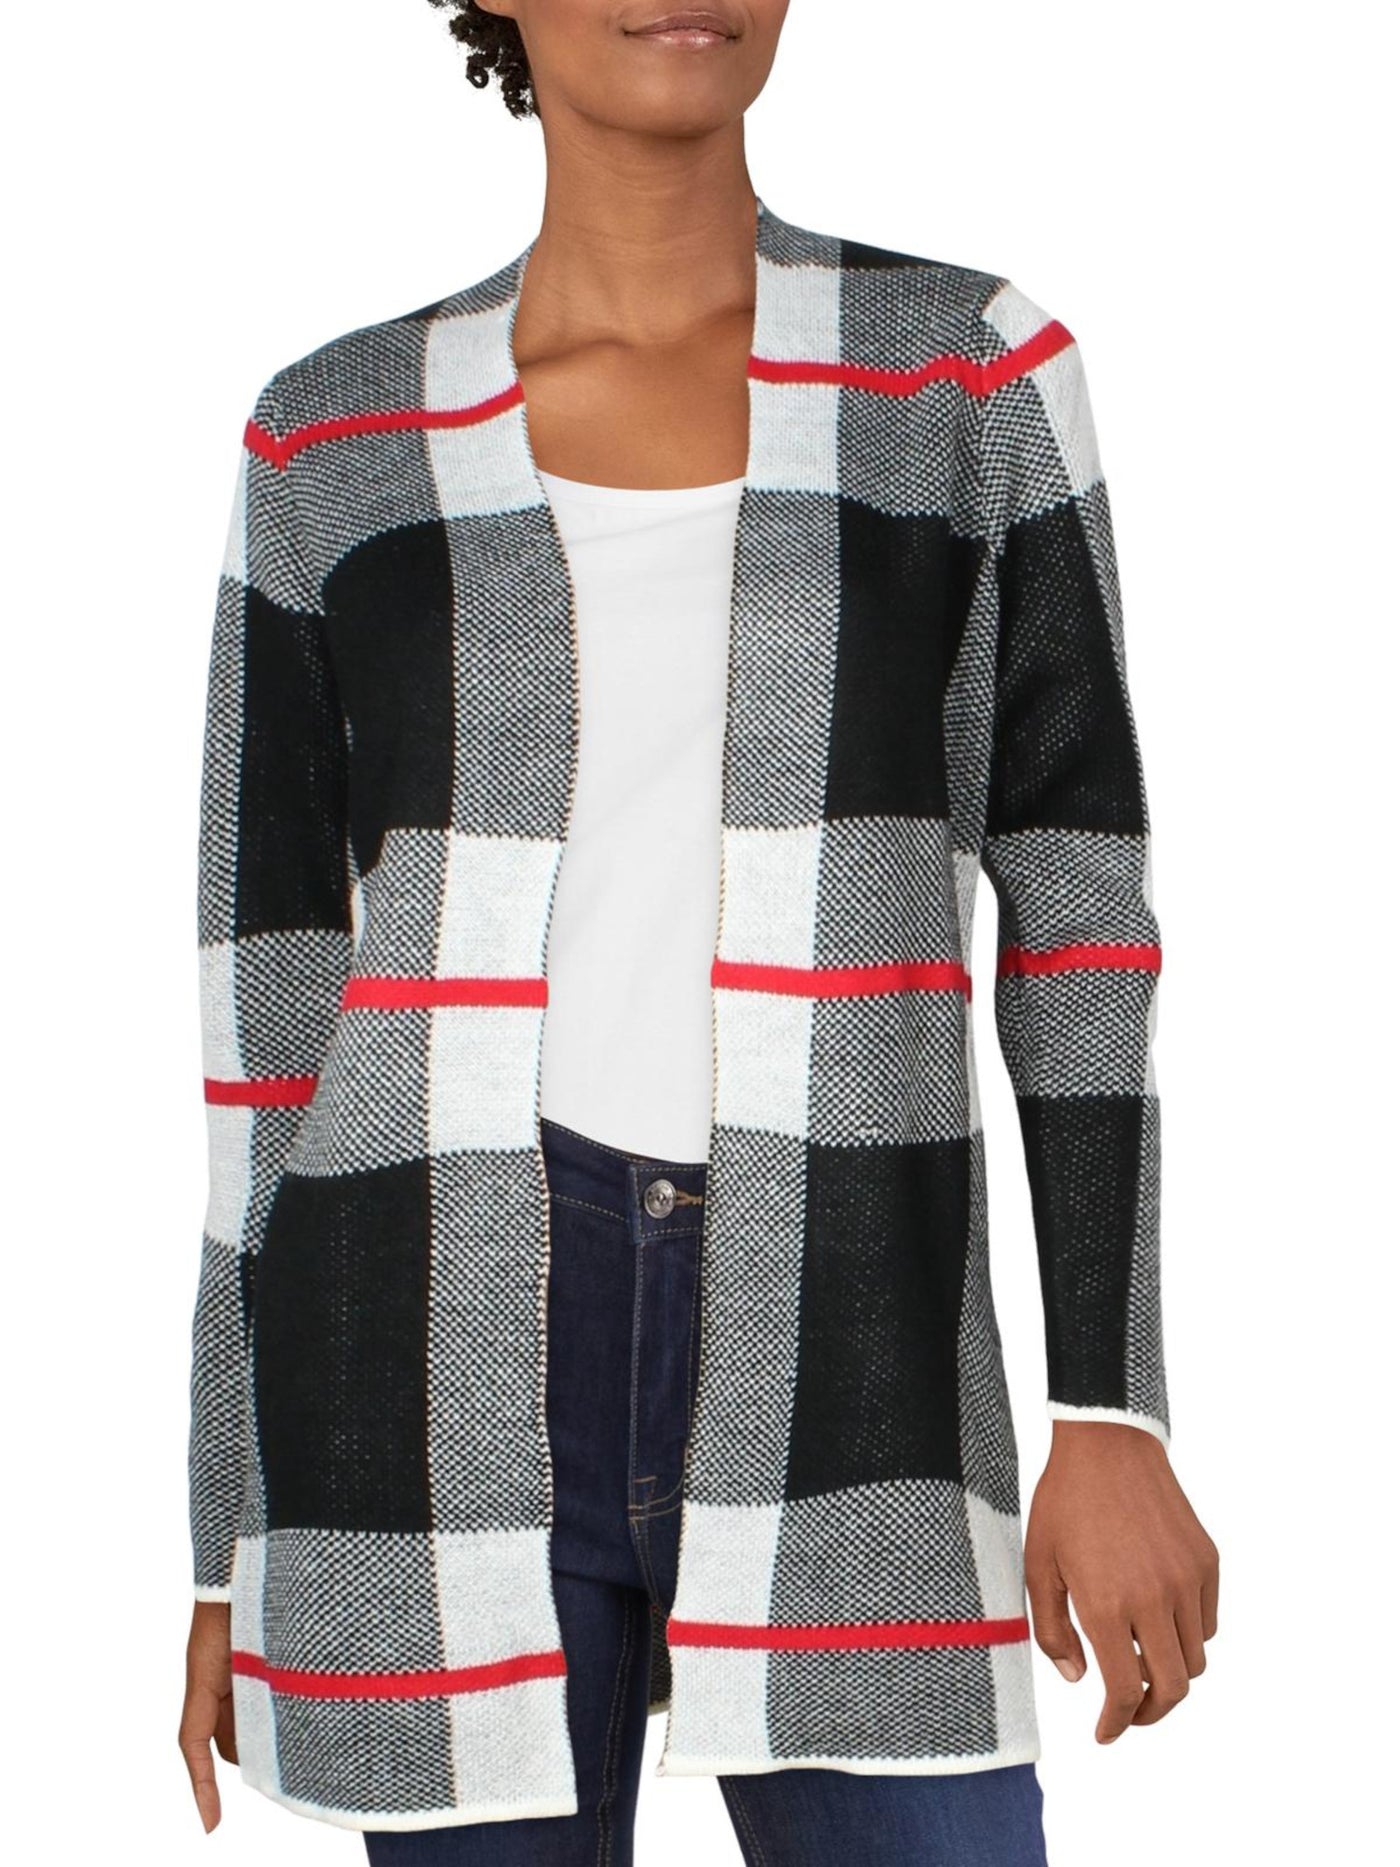 ALISON ANDREWS Womens Black Pocketed Plaid Long Sleeve Open Cardigan Wear To Work Duster Sweater L